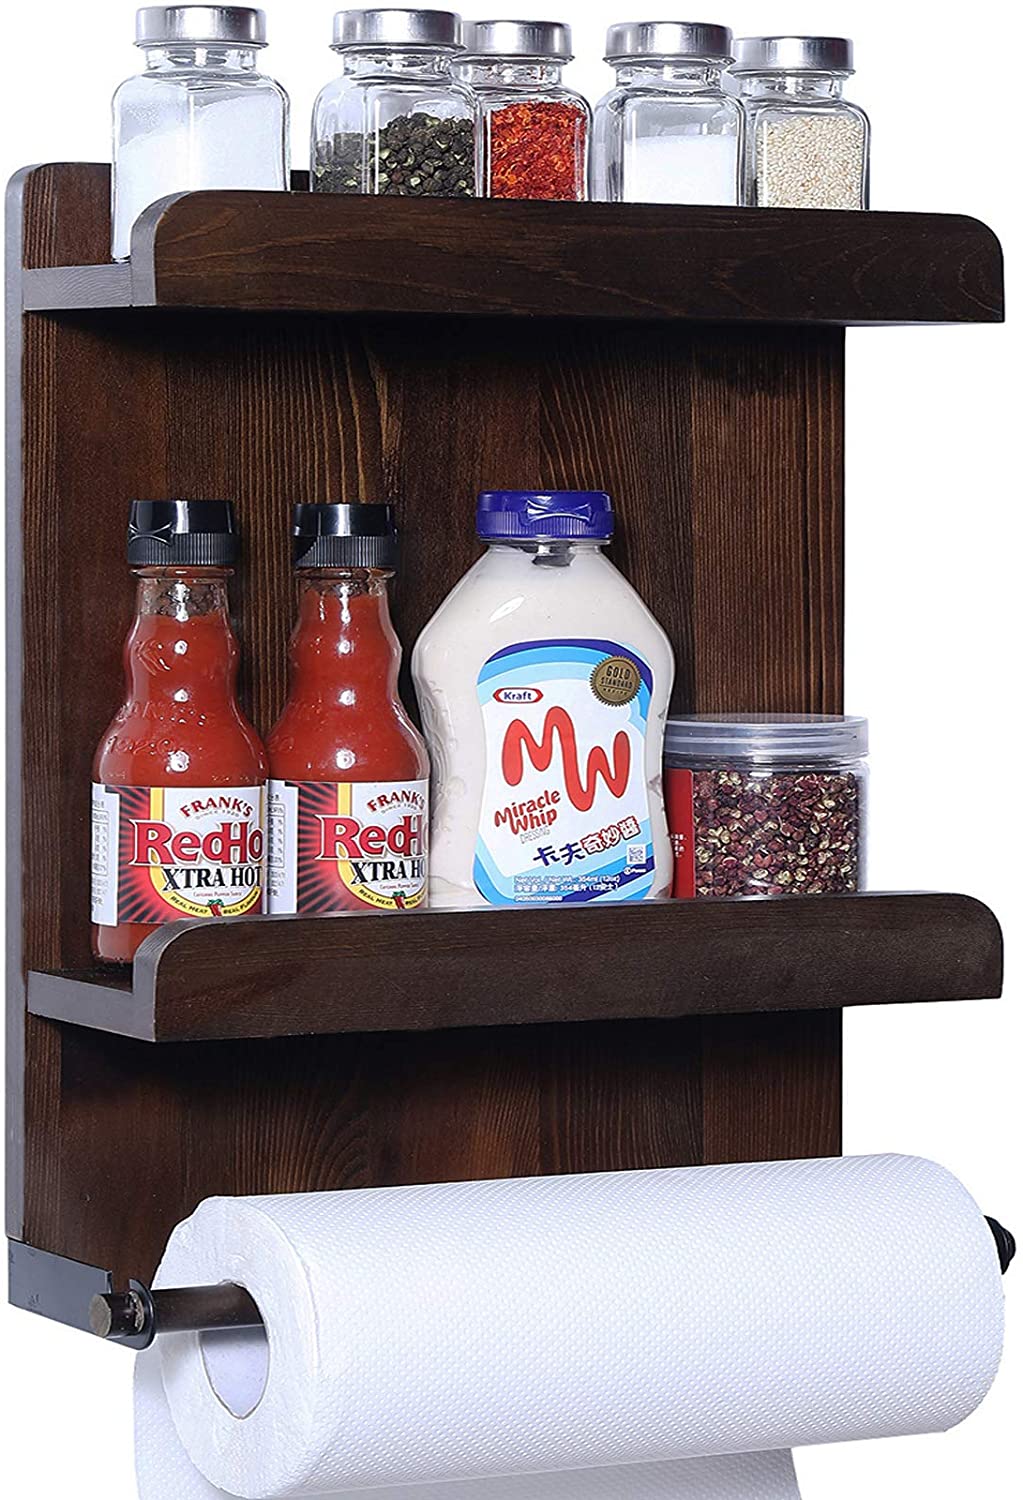 Takeoutsome Vertical Diversified Paper Towel Holder Wall Mount Paper Holder  Storage Rack